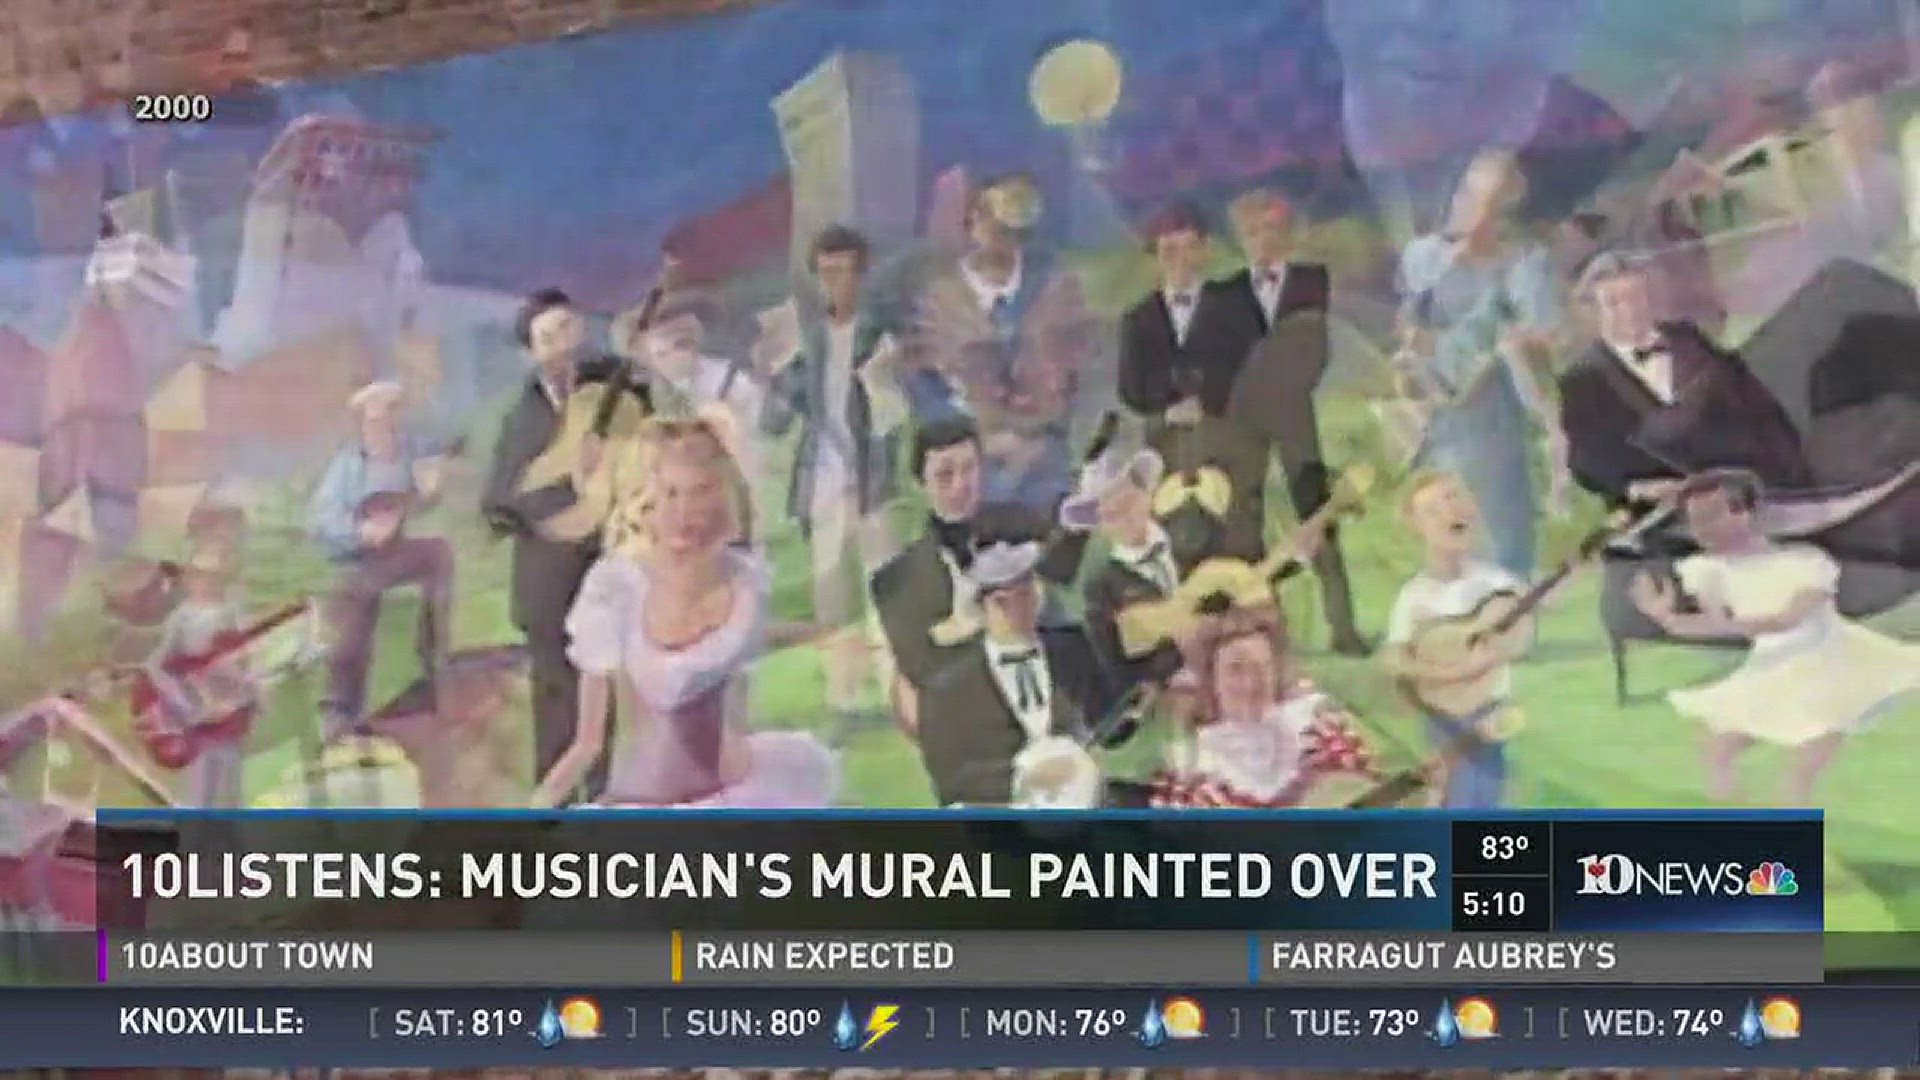 The musician's mural was painted on the side of a Jackson Avenue building, and featured big names in music, like Dolly Parton and Howard "Louie Bluie" Armstrong, It was painted more than 20 years ago. Now, it's been painted over.